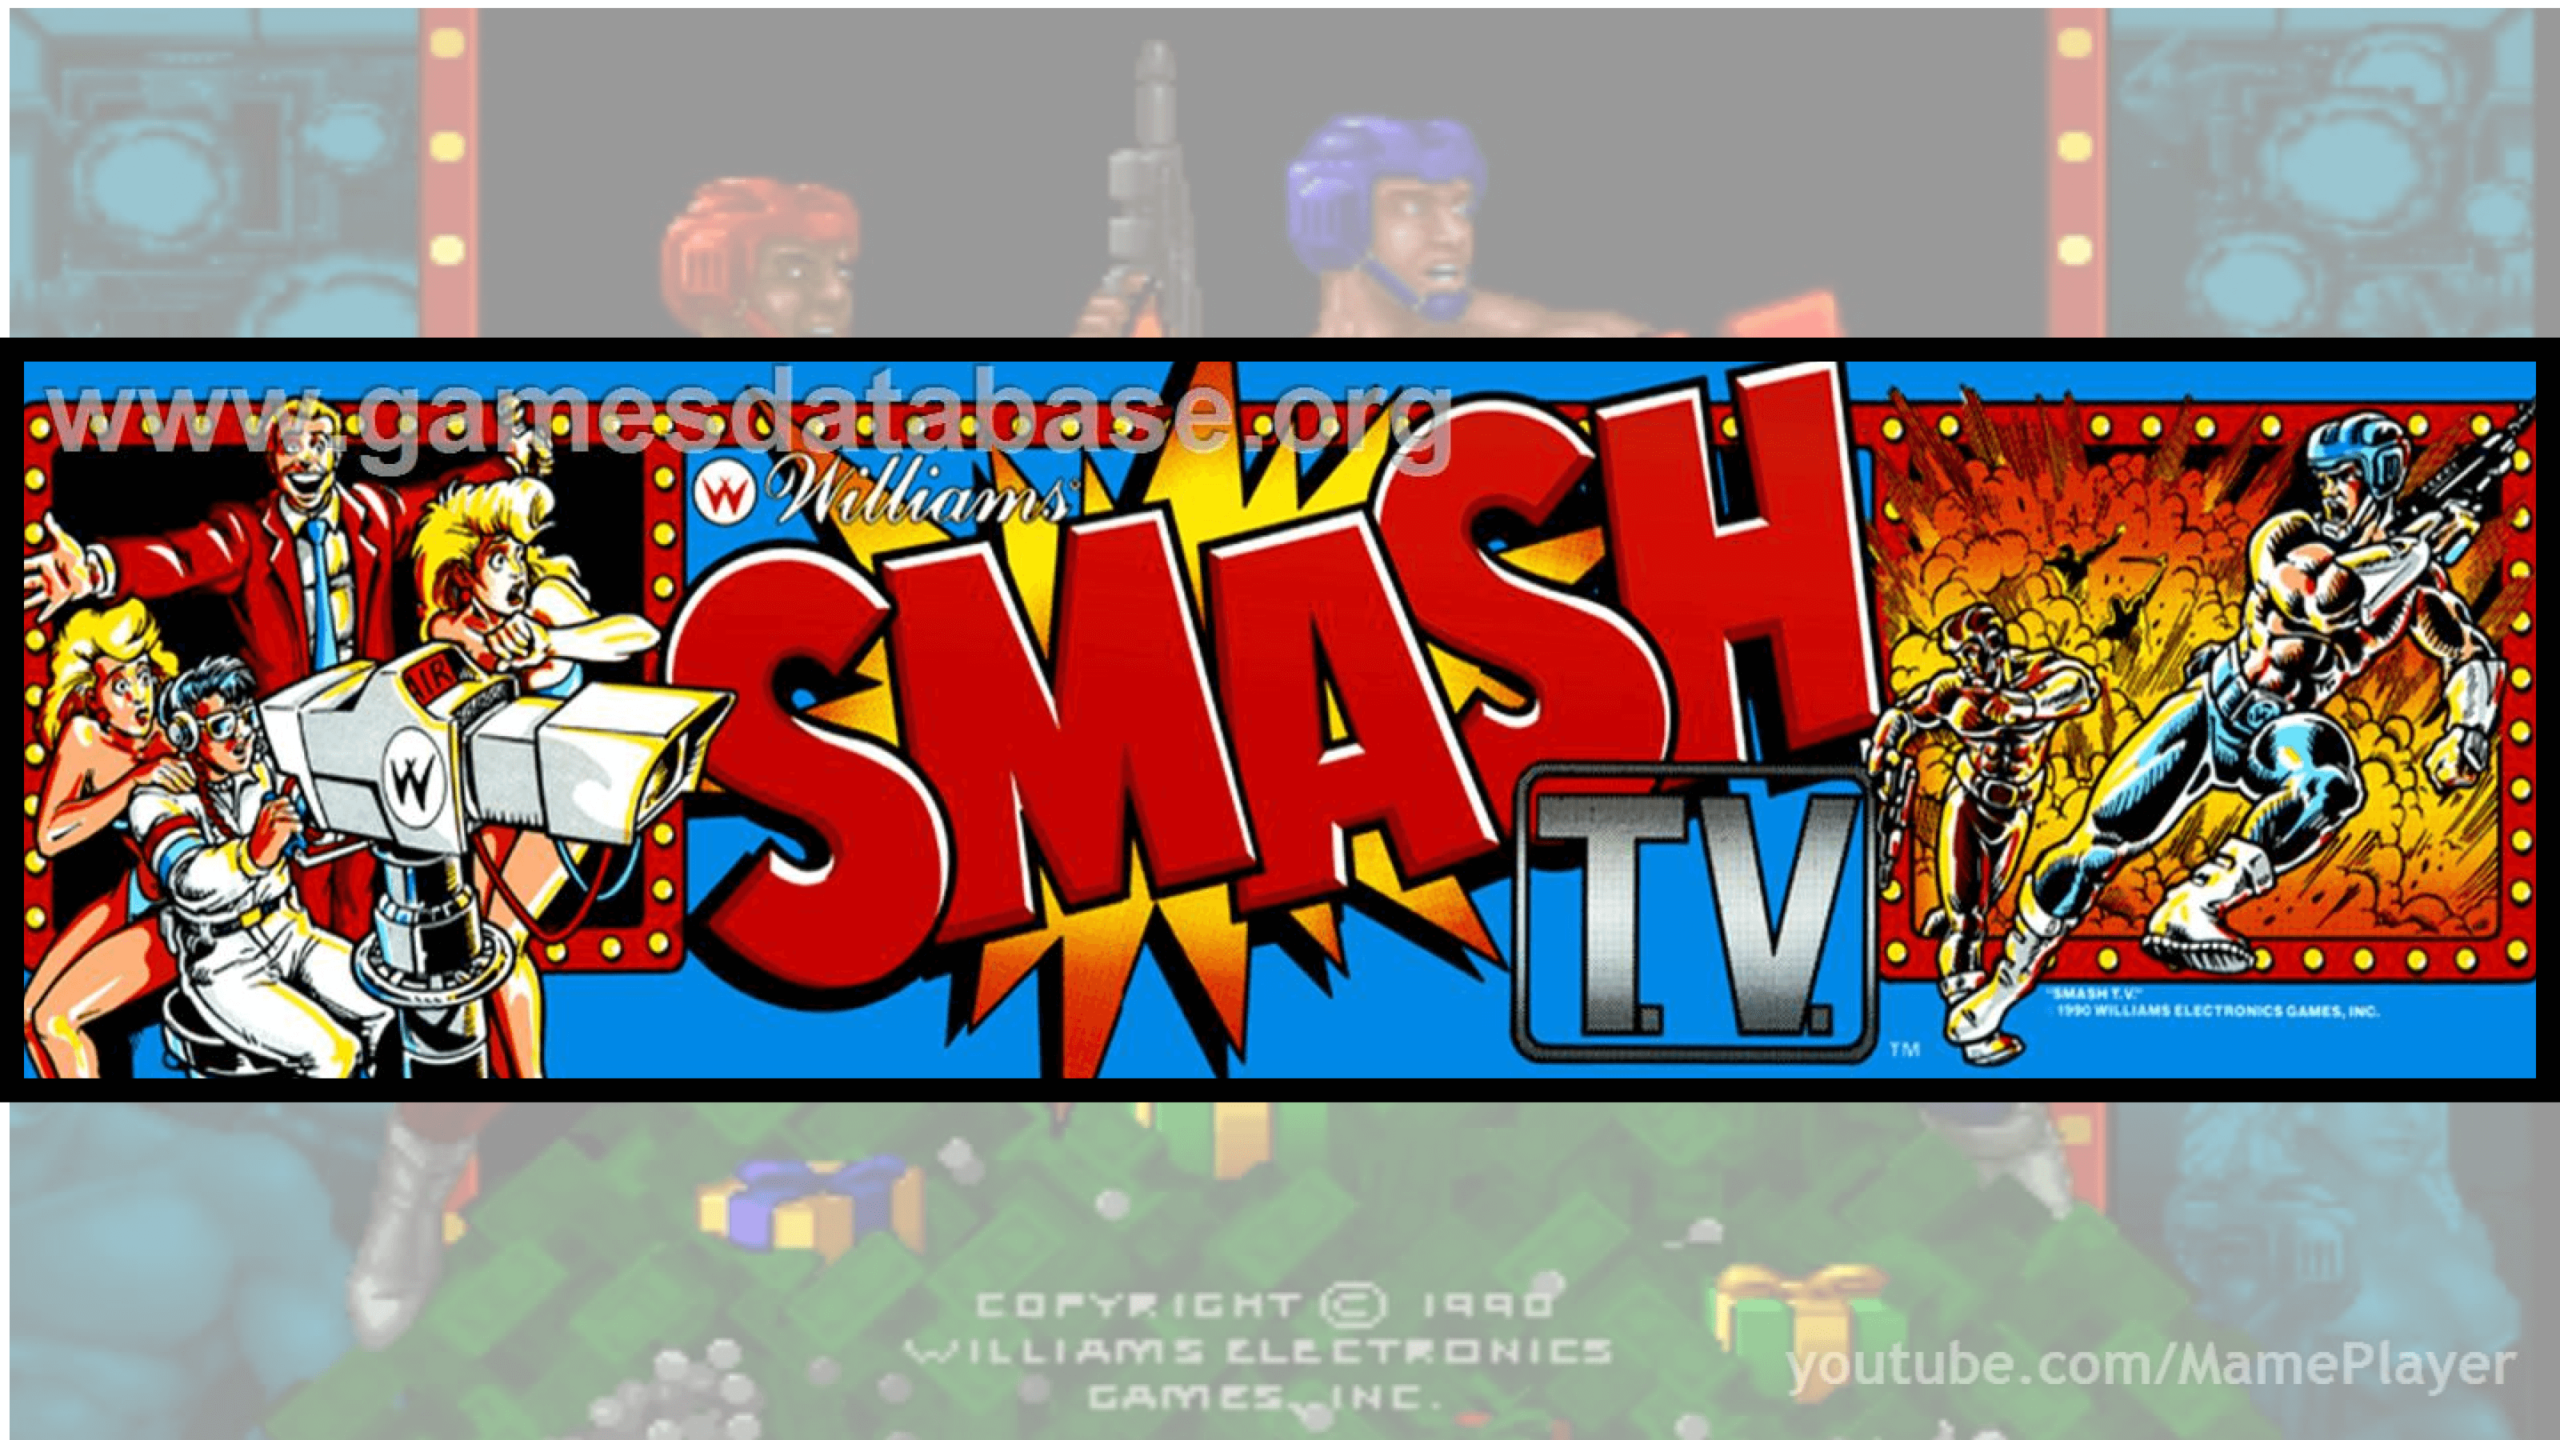 Read more about the article A World of Games: Smash TV